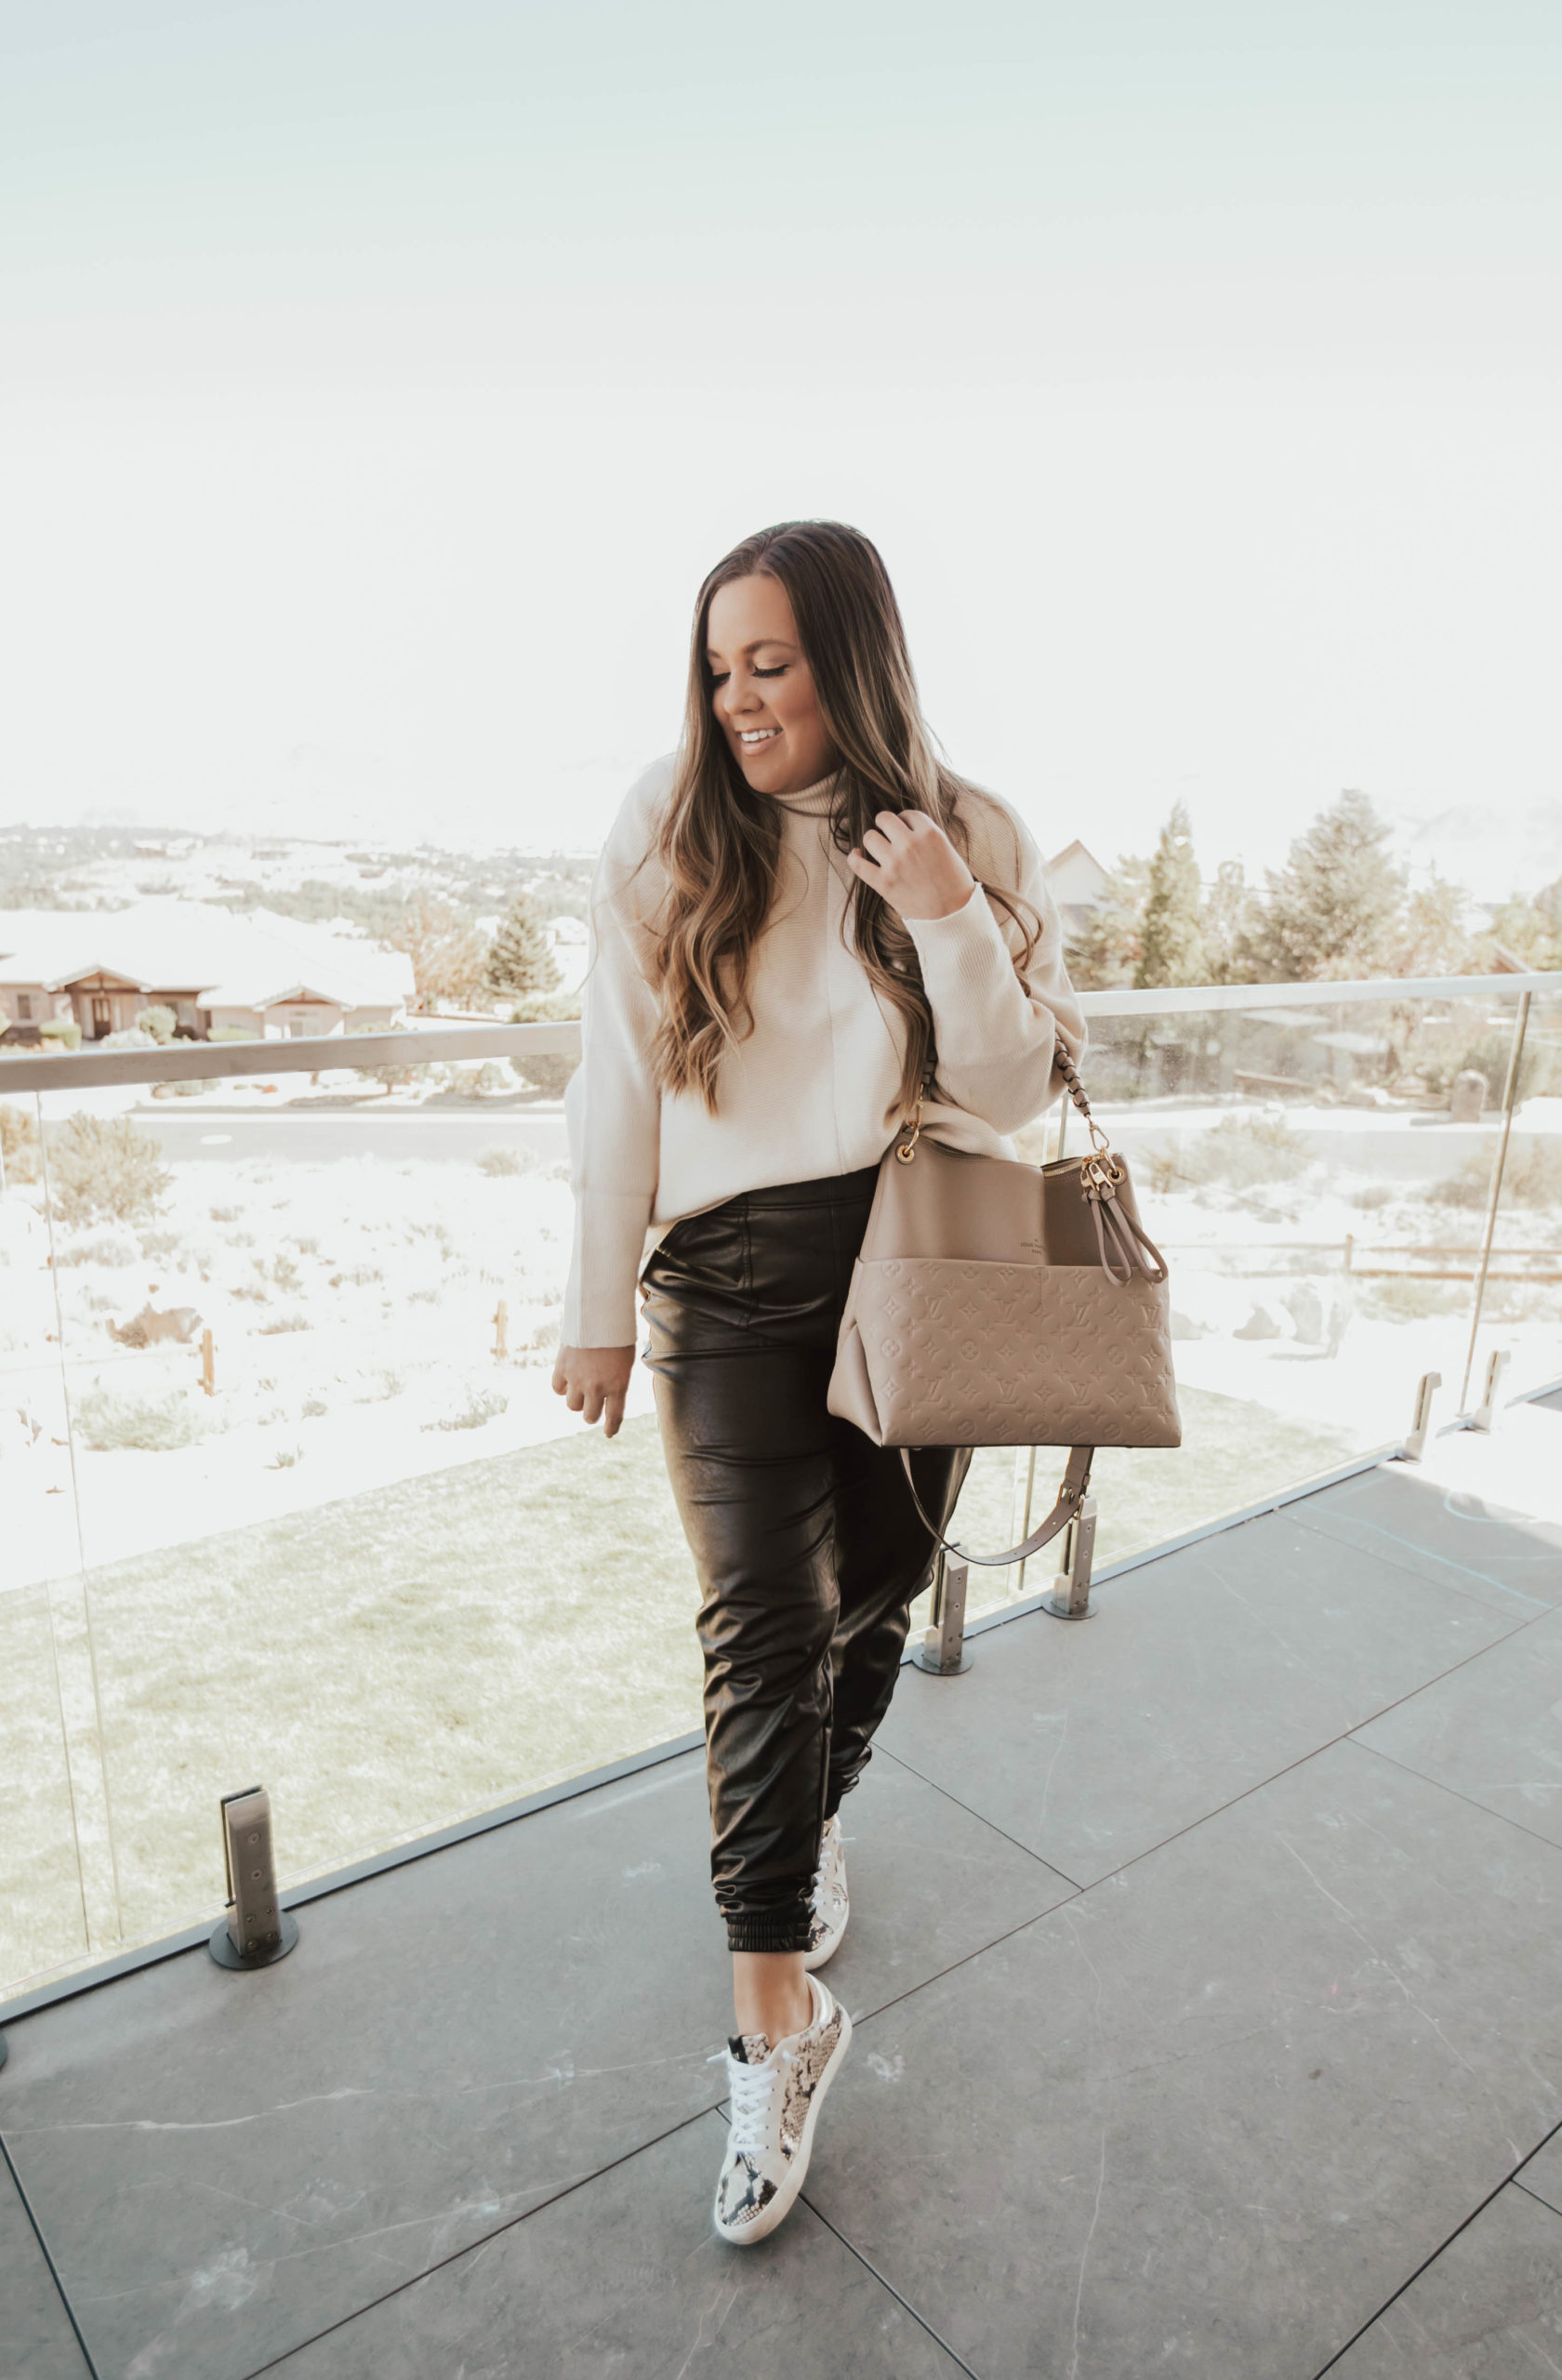 Reno blogger, Ashley Zeal Hurd from the Ashley and Emily blog shares her Amazon Favorites September 2020. The best sweaters and home organization!